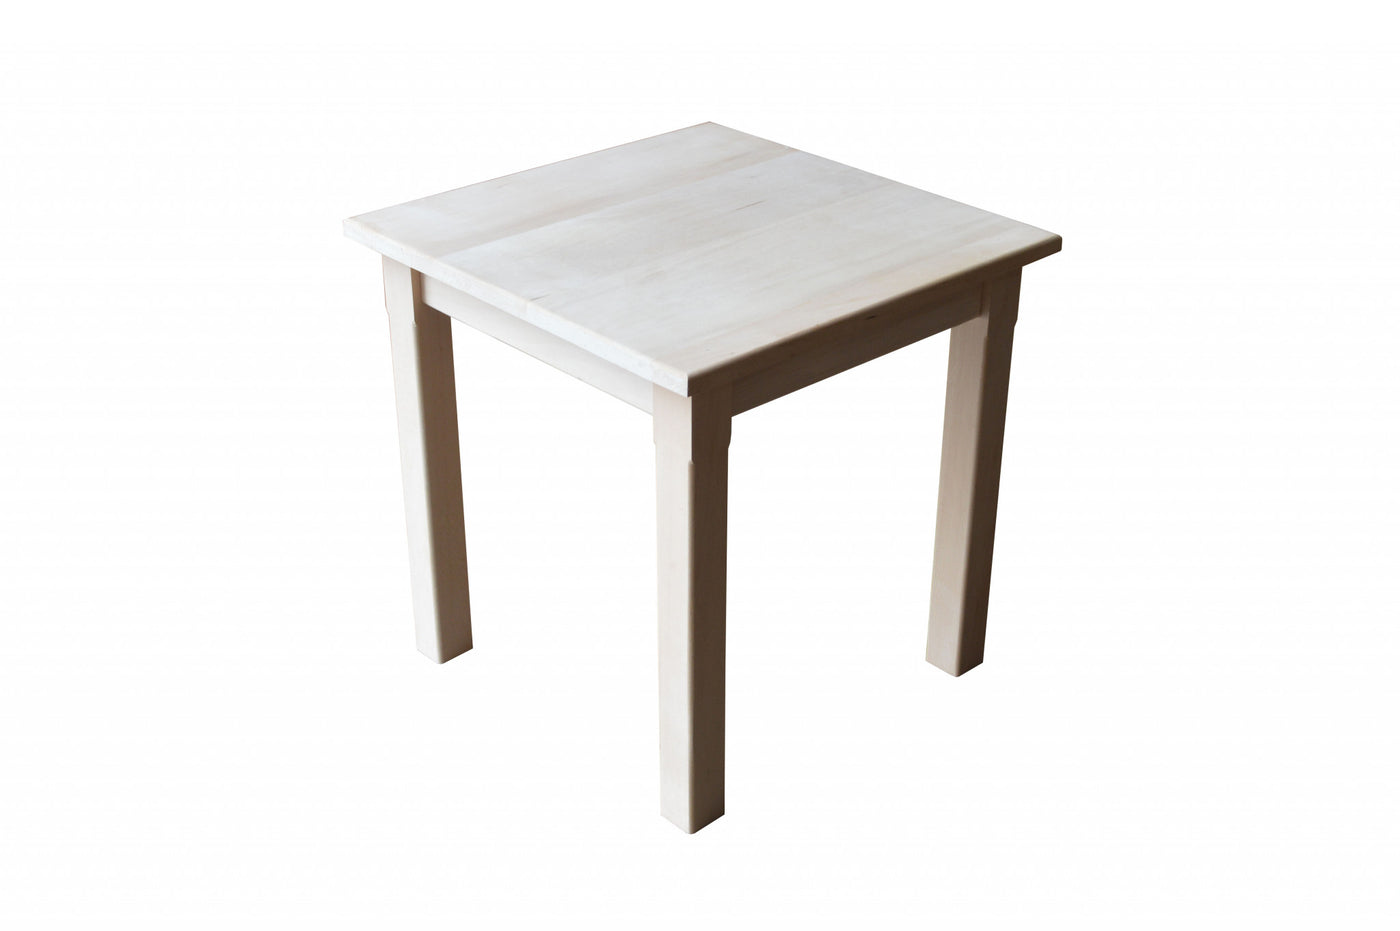 20" Unfinished Solid Wood Square End Table